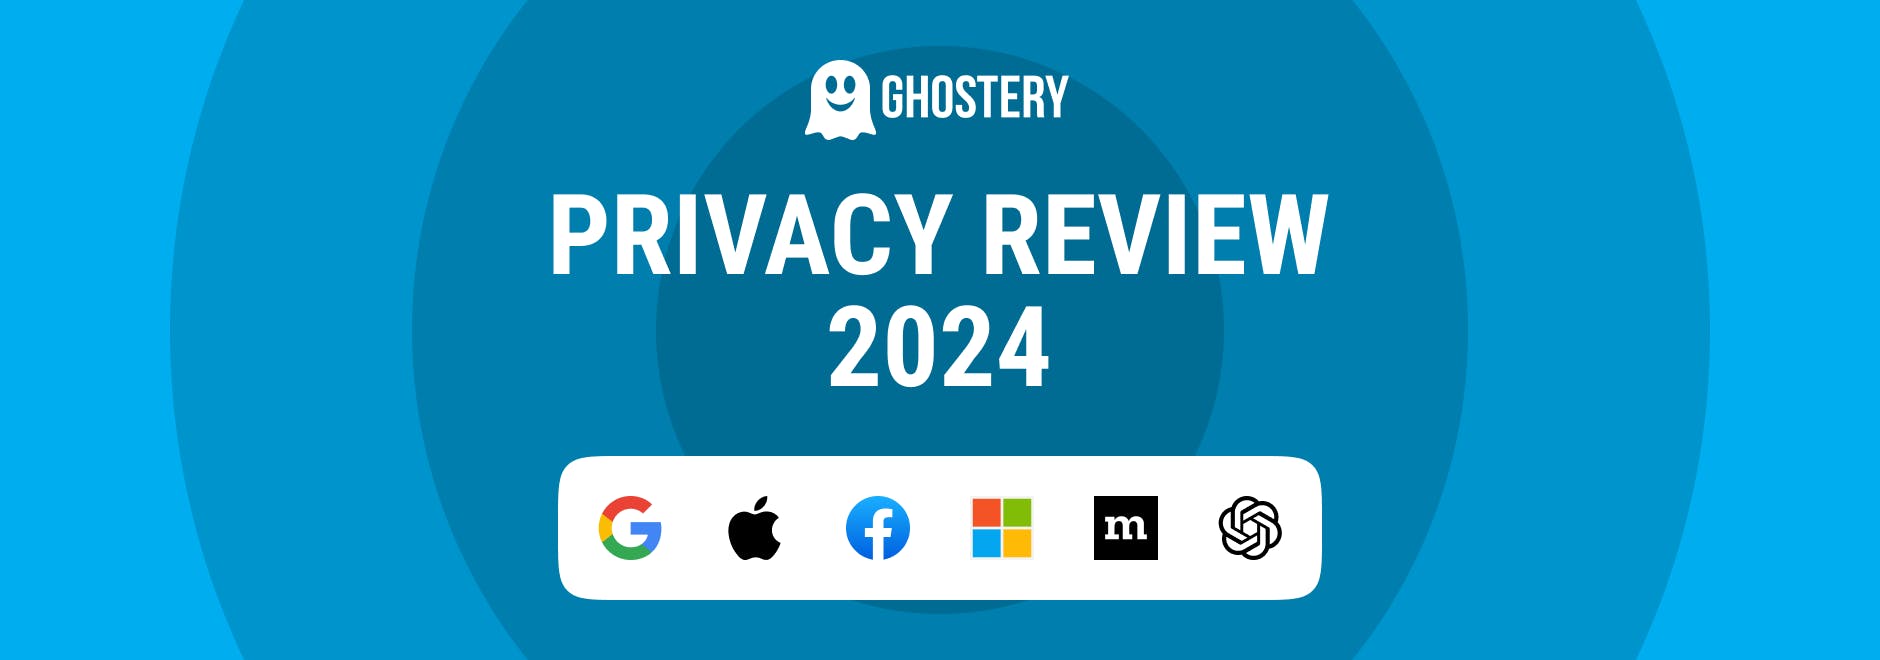 Ghostery Privacy Review 2024 - How Tech Industry Leaders Manage Your Data